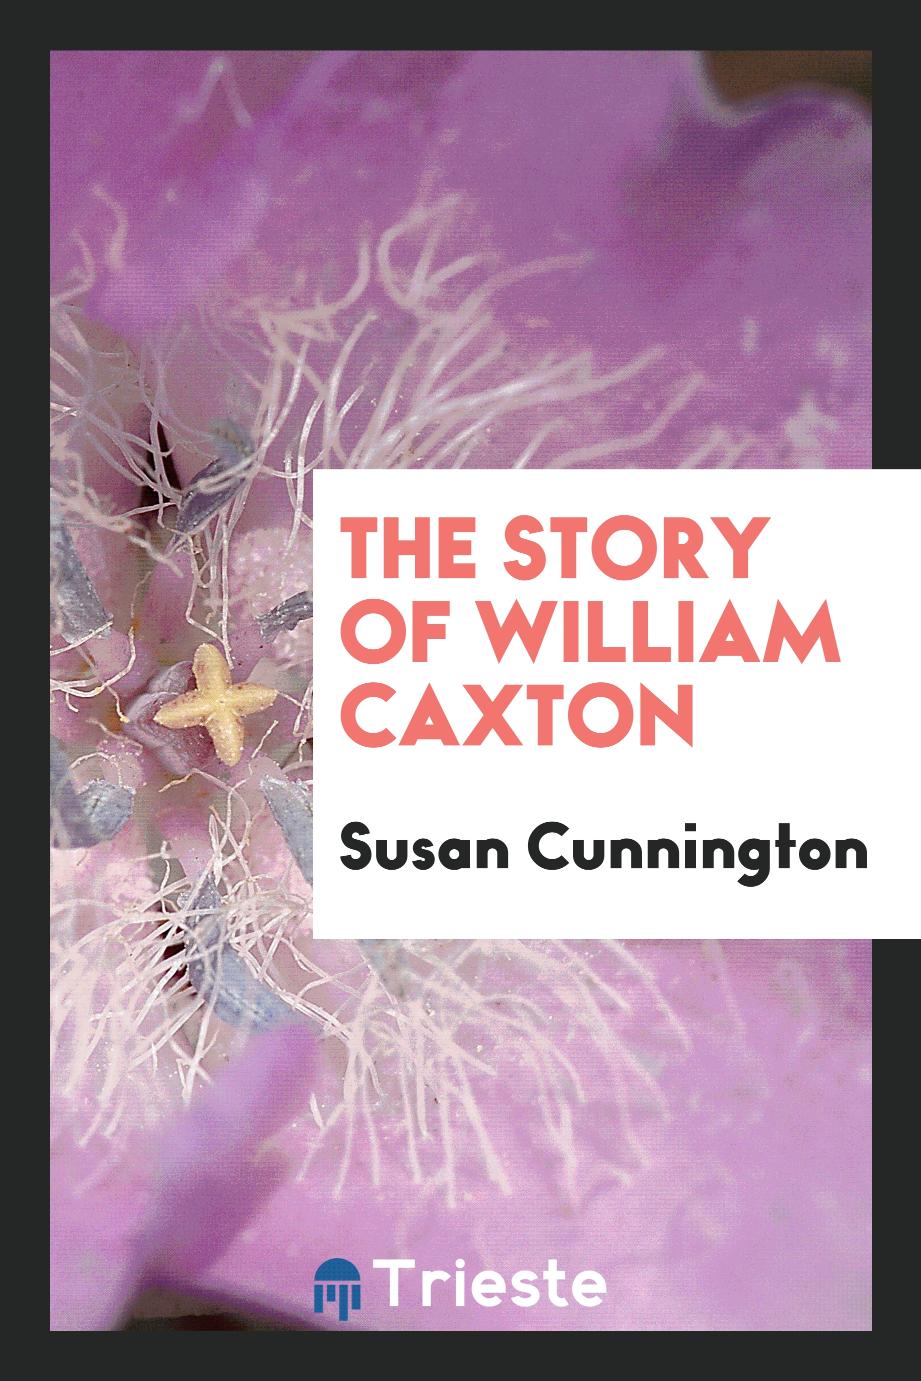 The story of William Caxton